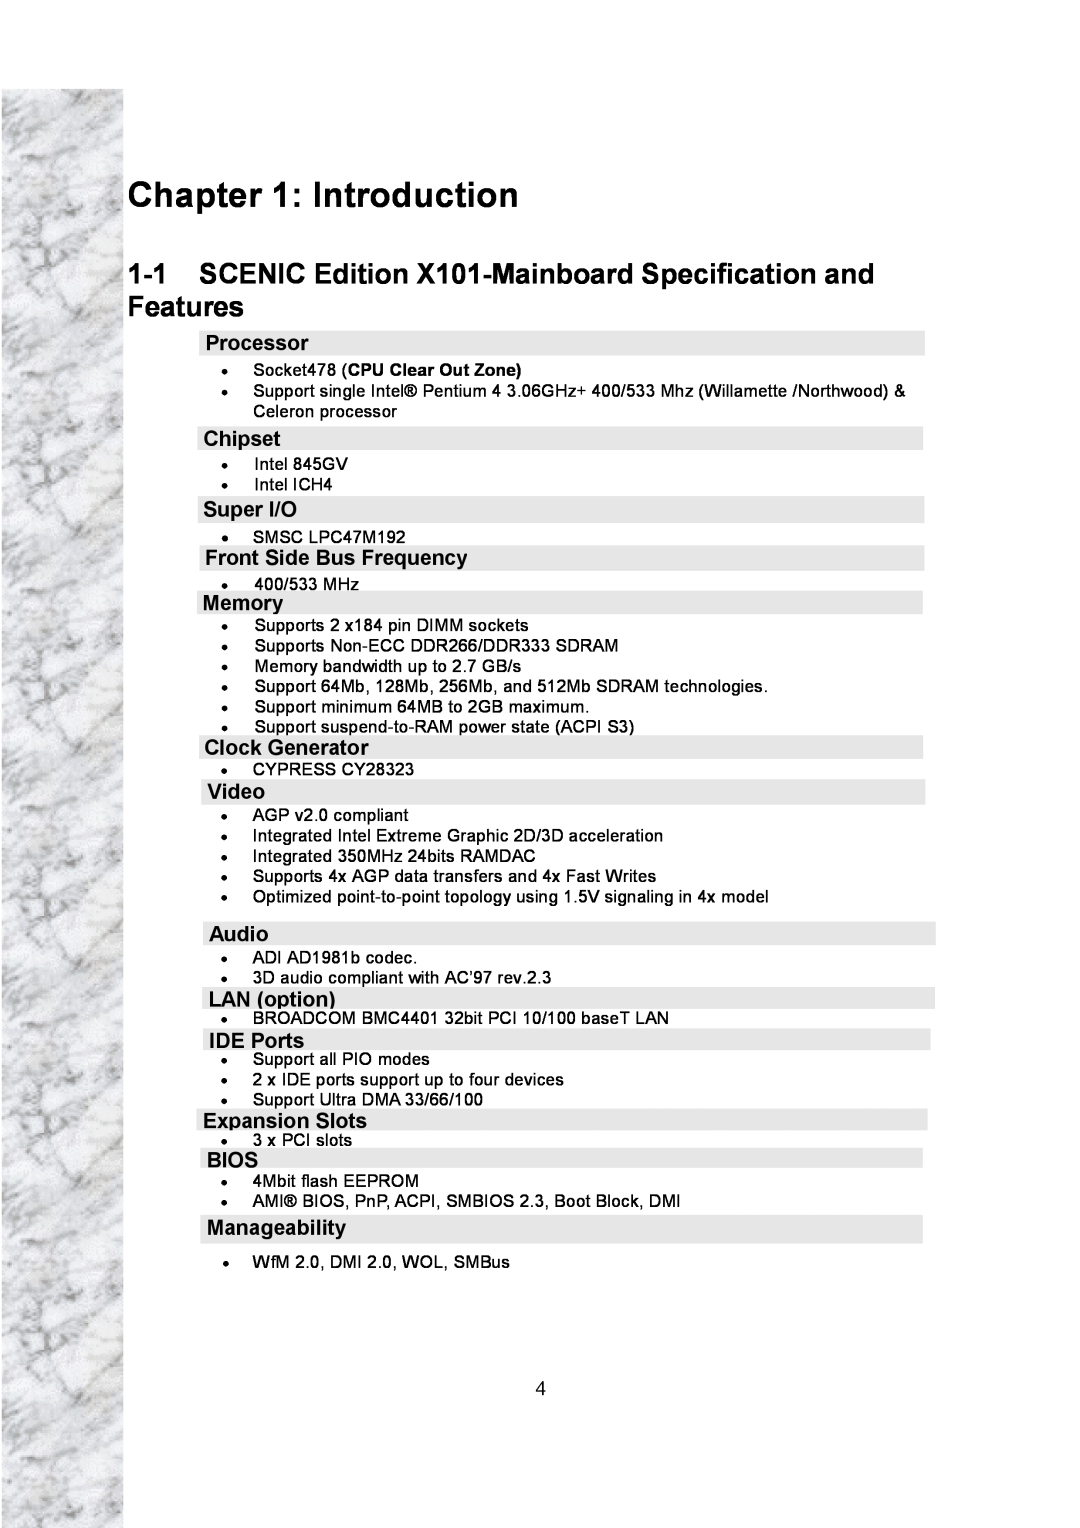 Intel user manual Introduction, SCENIC Edition X101-Mainboard Specification and Features 